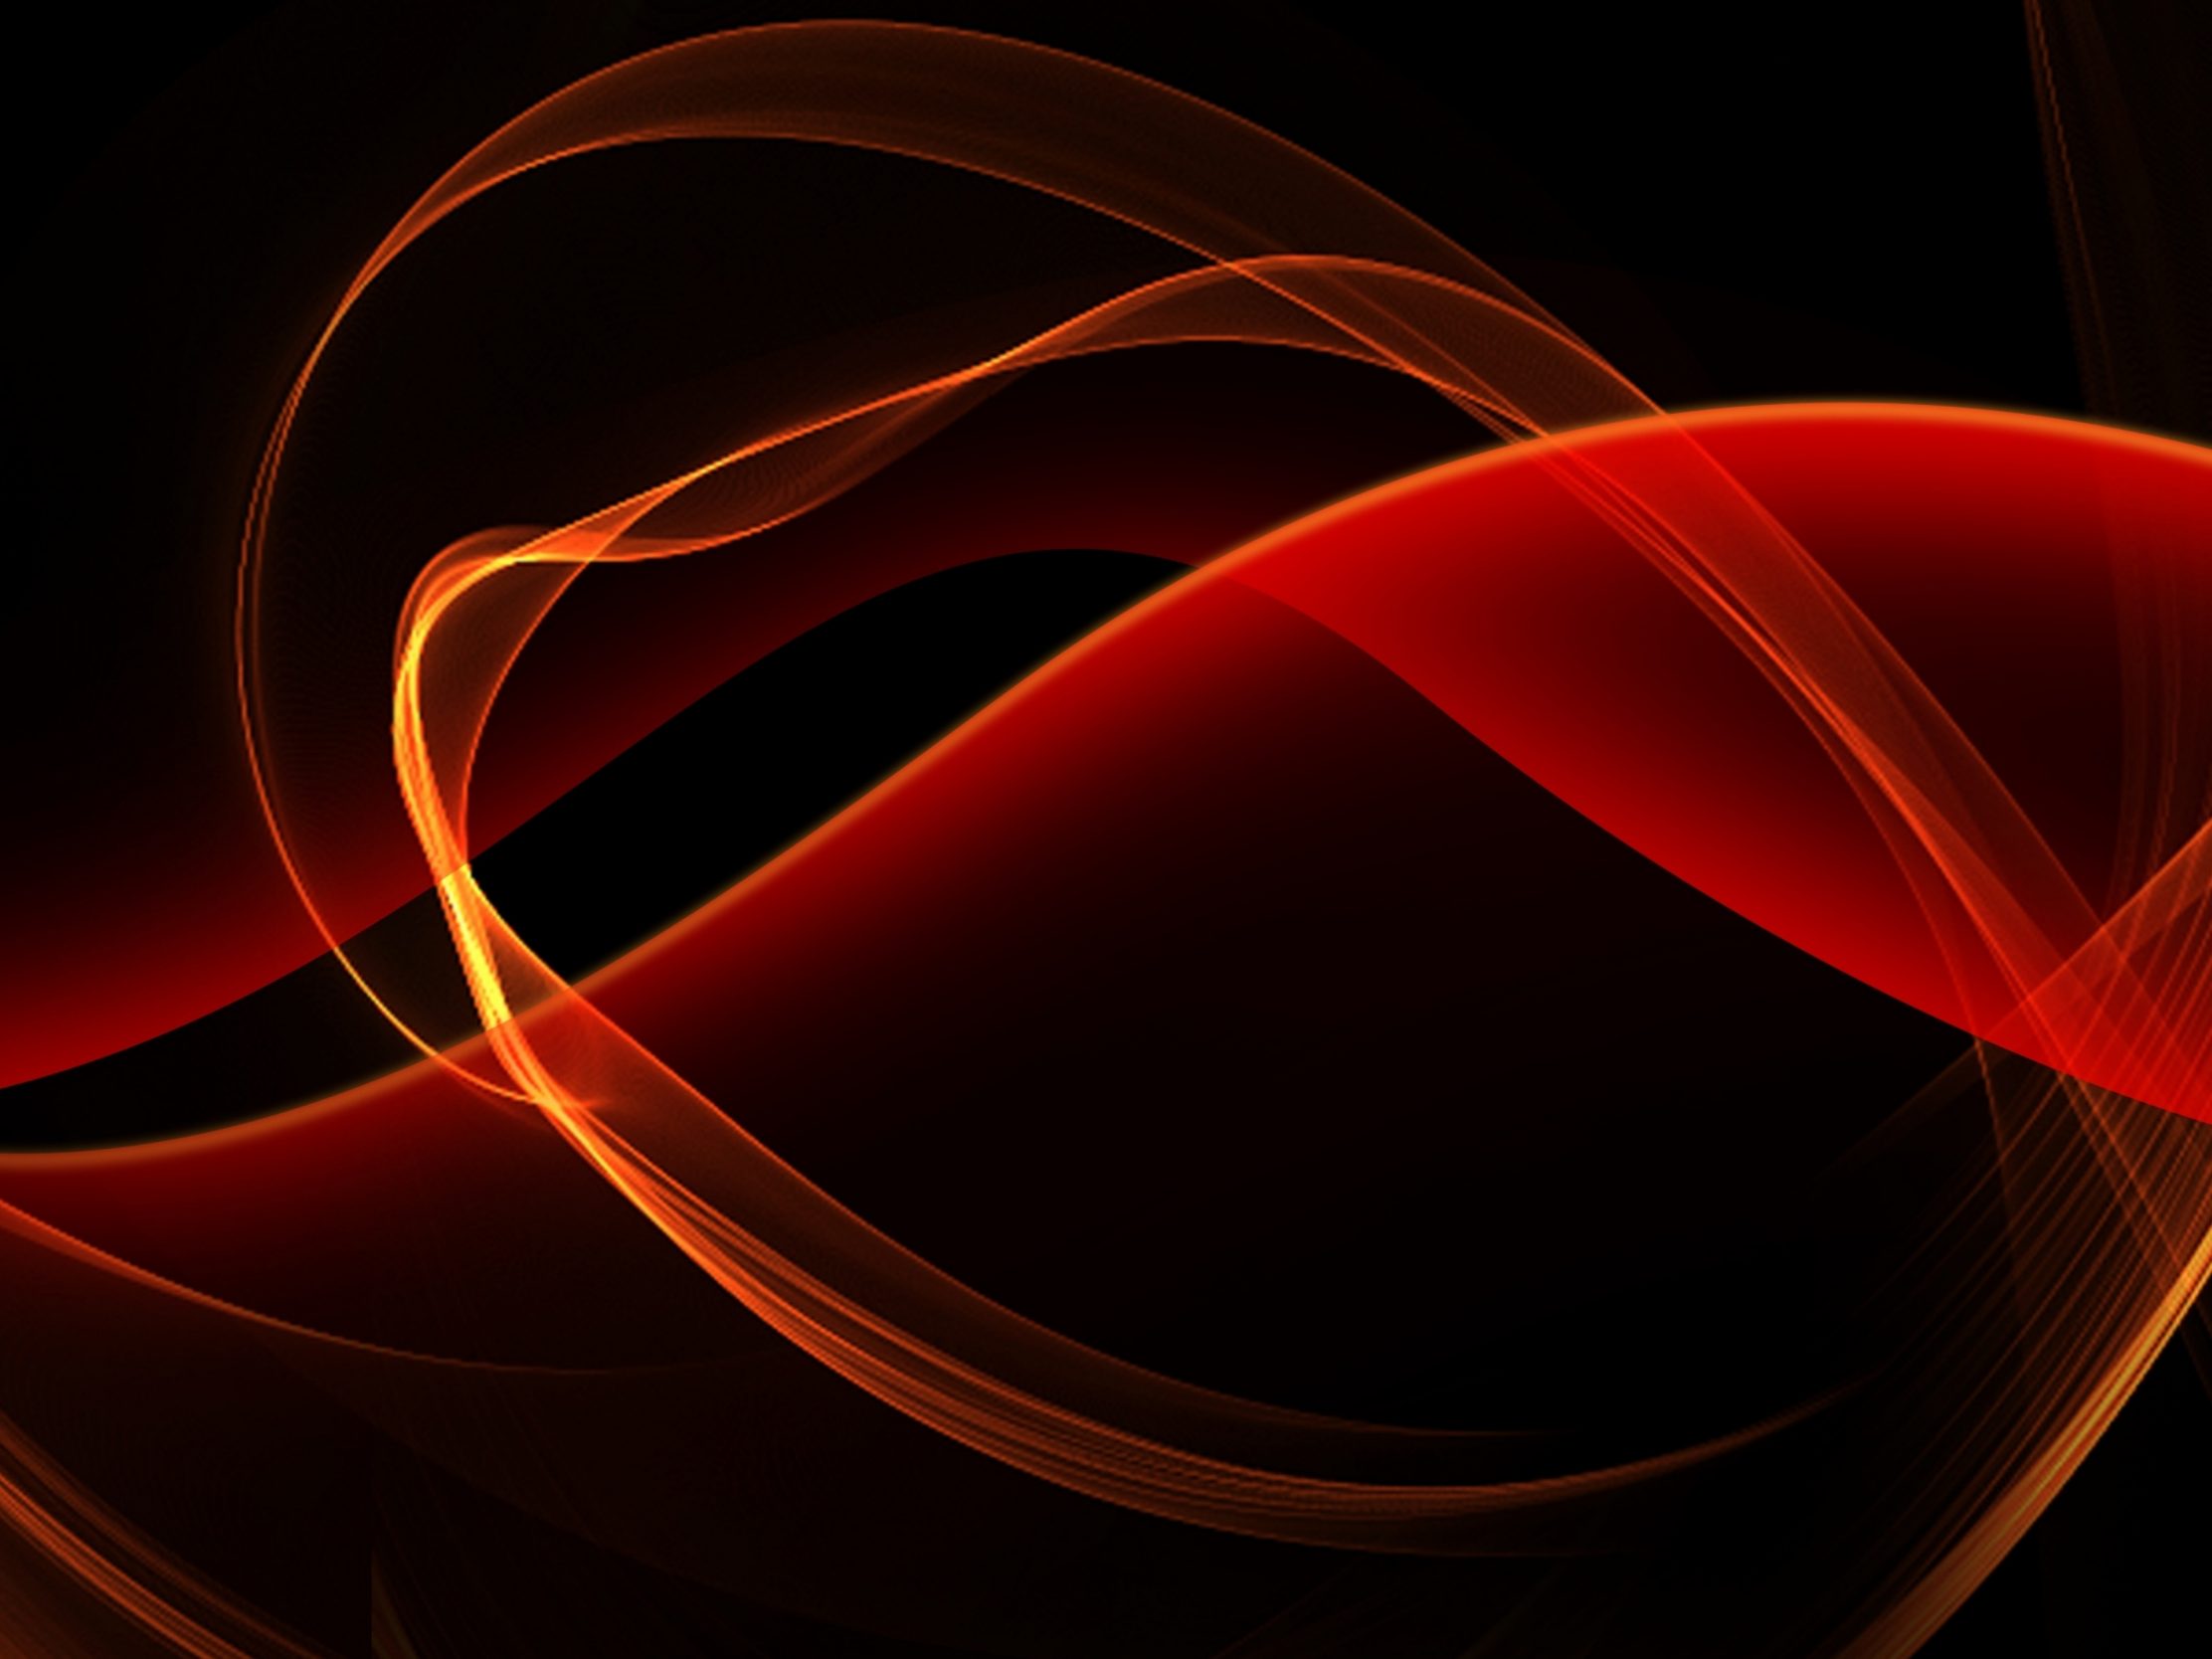 2224x1668 iPad Pro wallpapers Black and Red Glowing Curves iPad Wallpaper 2224x1668 pixels resolution